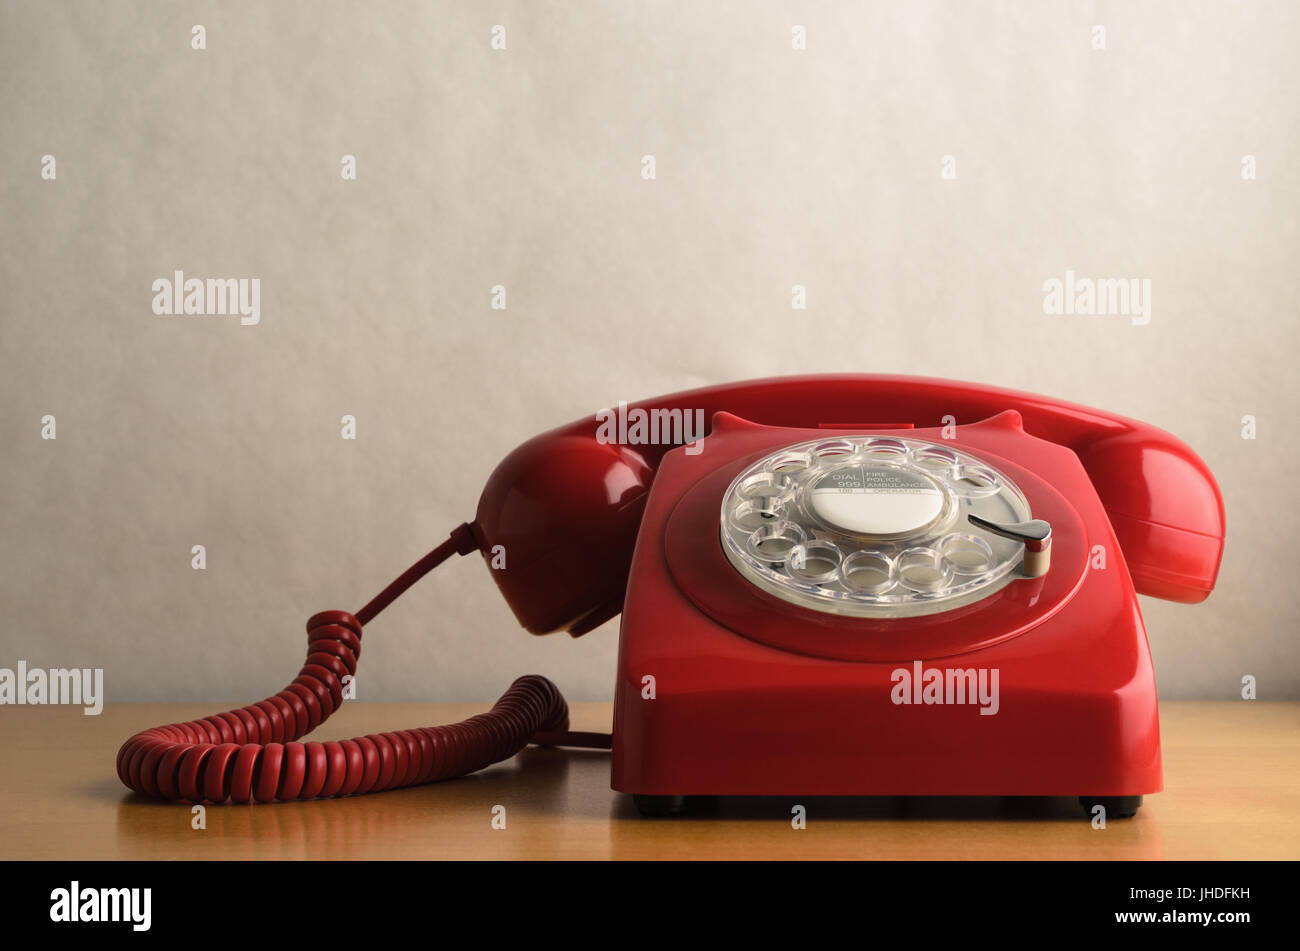 Eye level shot of a retro red telephone (British circa 1960s to 1970s) on a light wood veneer desk or table with off white background providing copy s Stock Photo